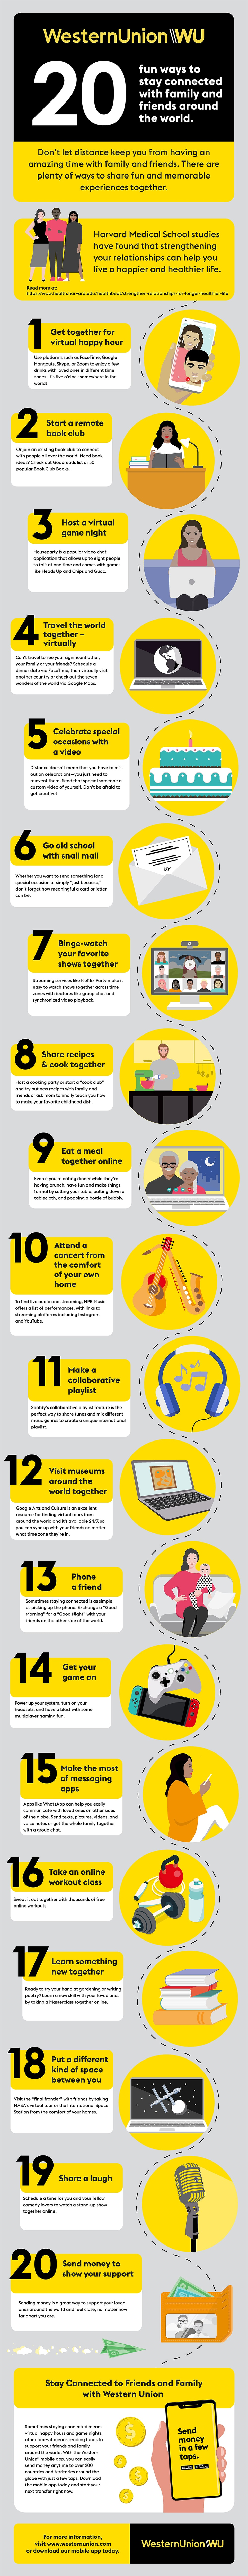 20 ways to stay in touch infographic by Western Union